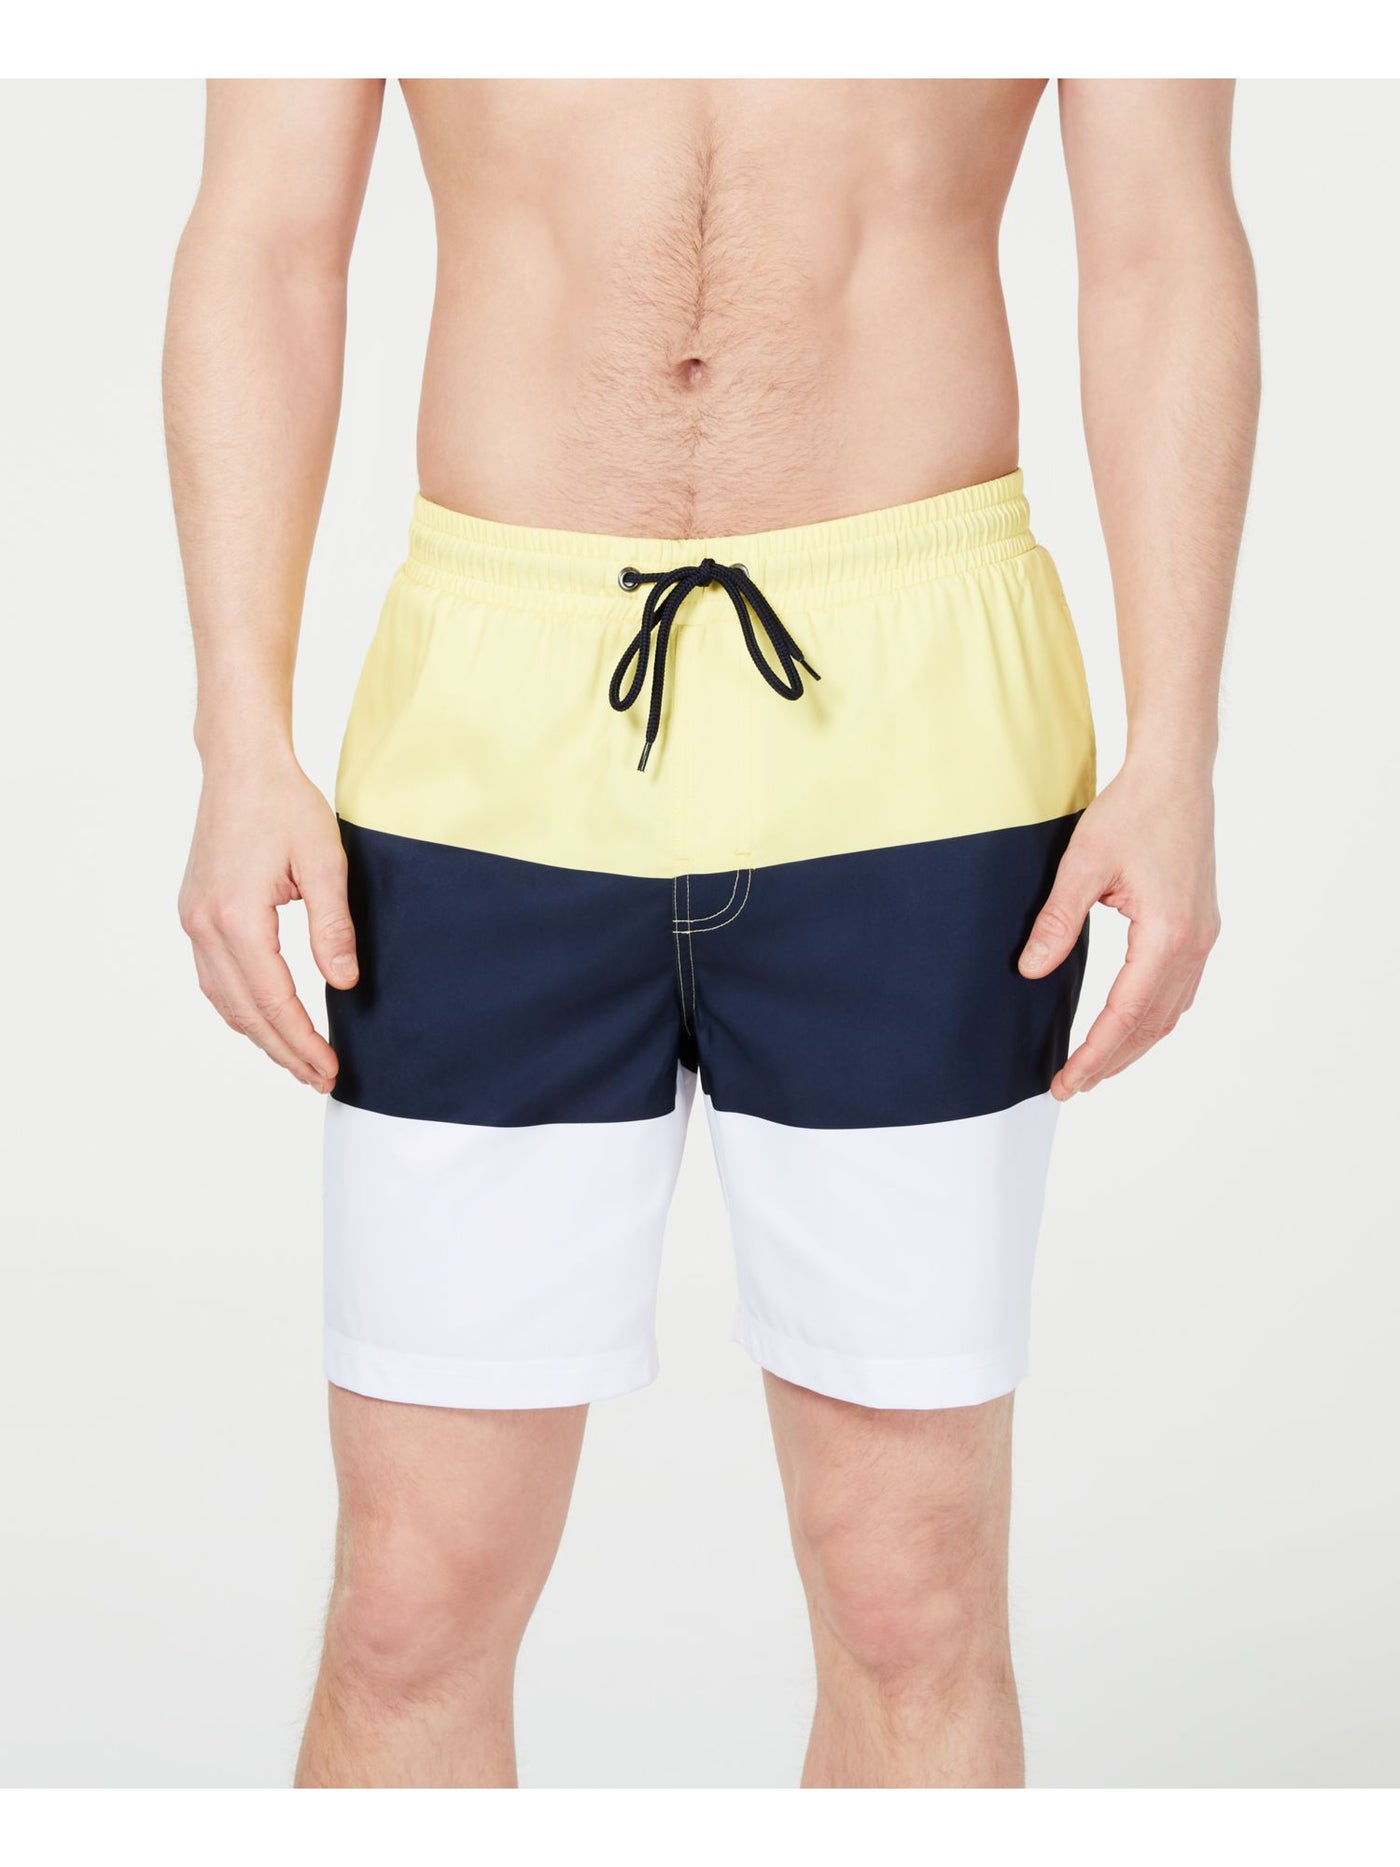 CLUBROOM Mens Yellow Drawstring Lined Color Block Classic Fit Swim Trunks S